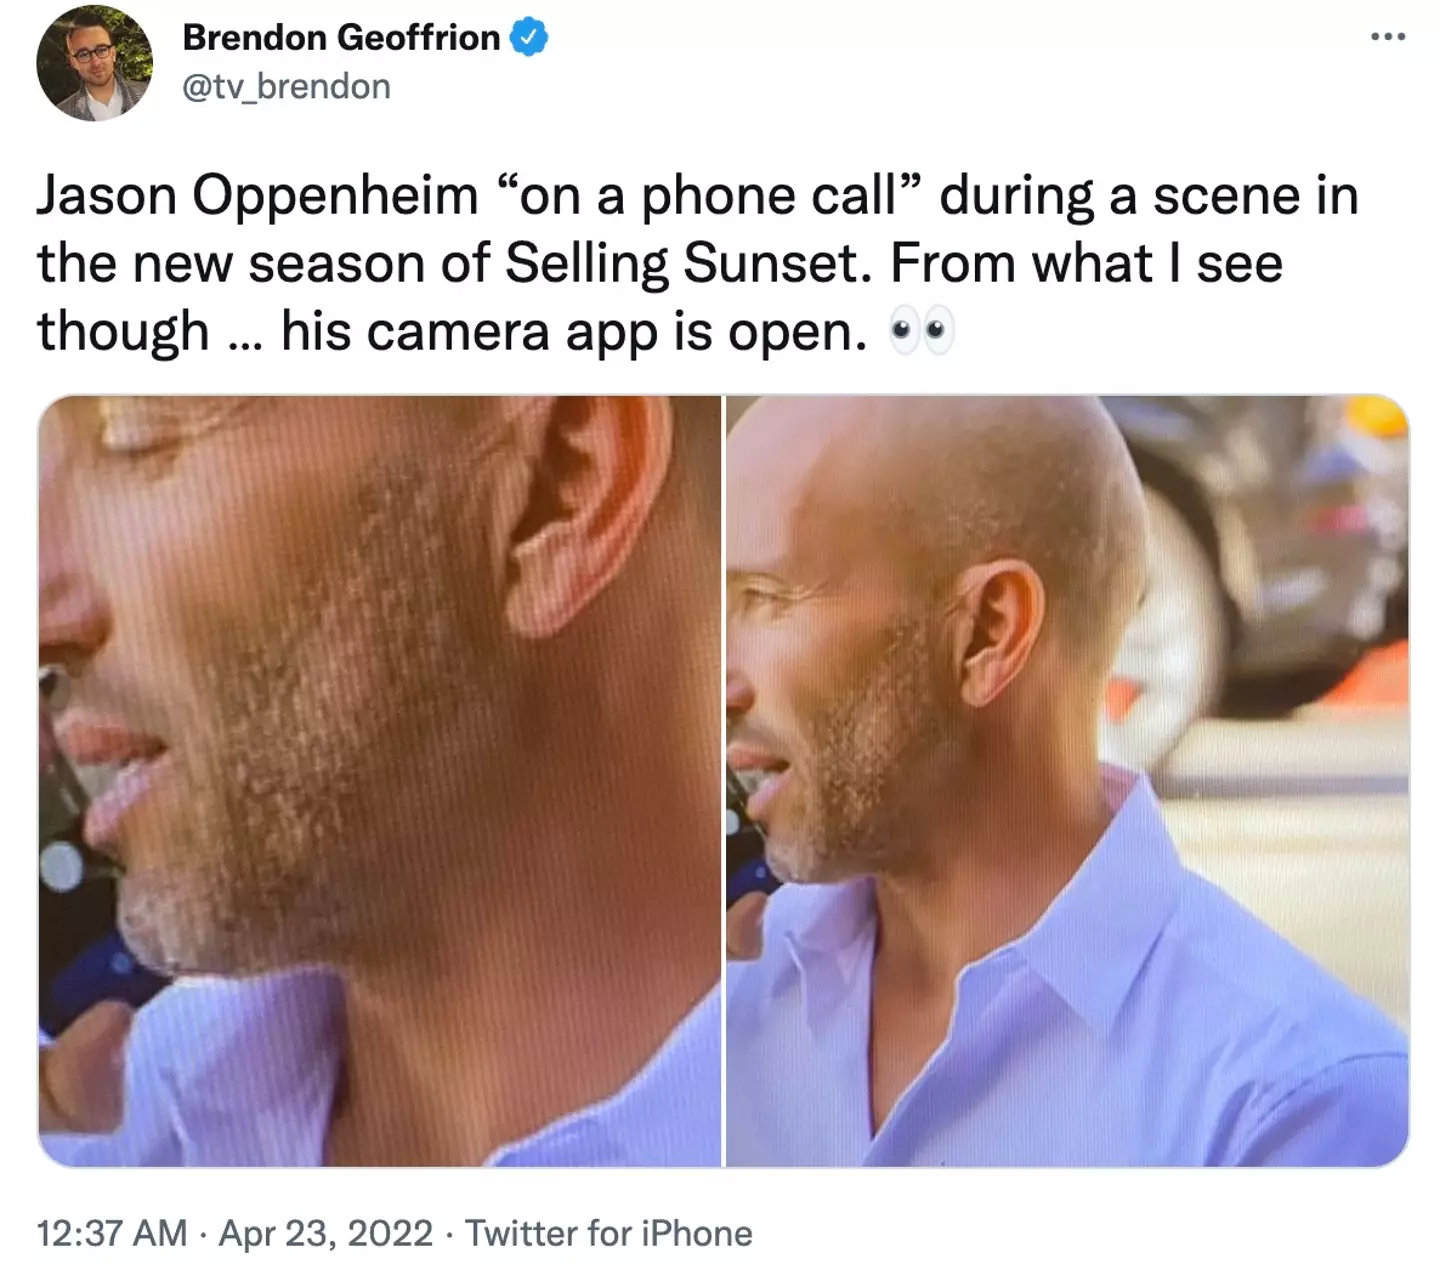 Brendon also tweeted: “Jason Oppenheim ‘on a phone call’ during a scene in the new season of Selling Sunset. From what I see though … his camera app is open.” (Twitter @tv_brendon).